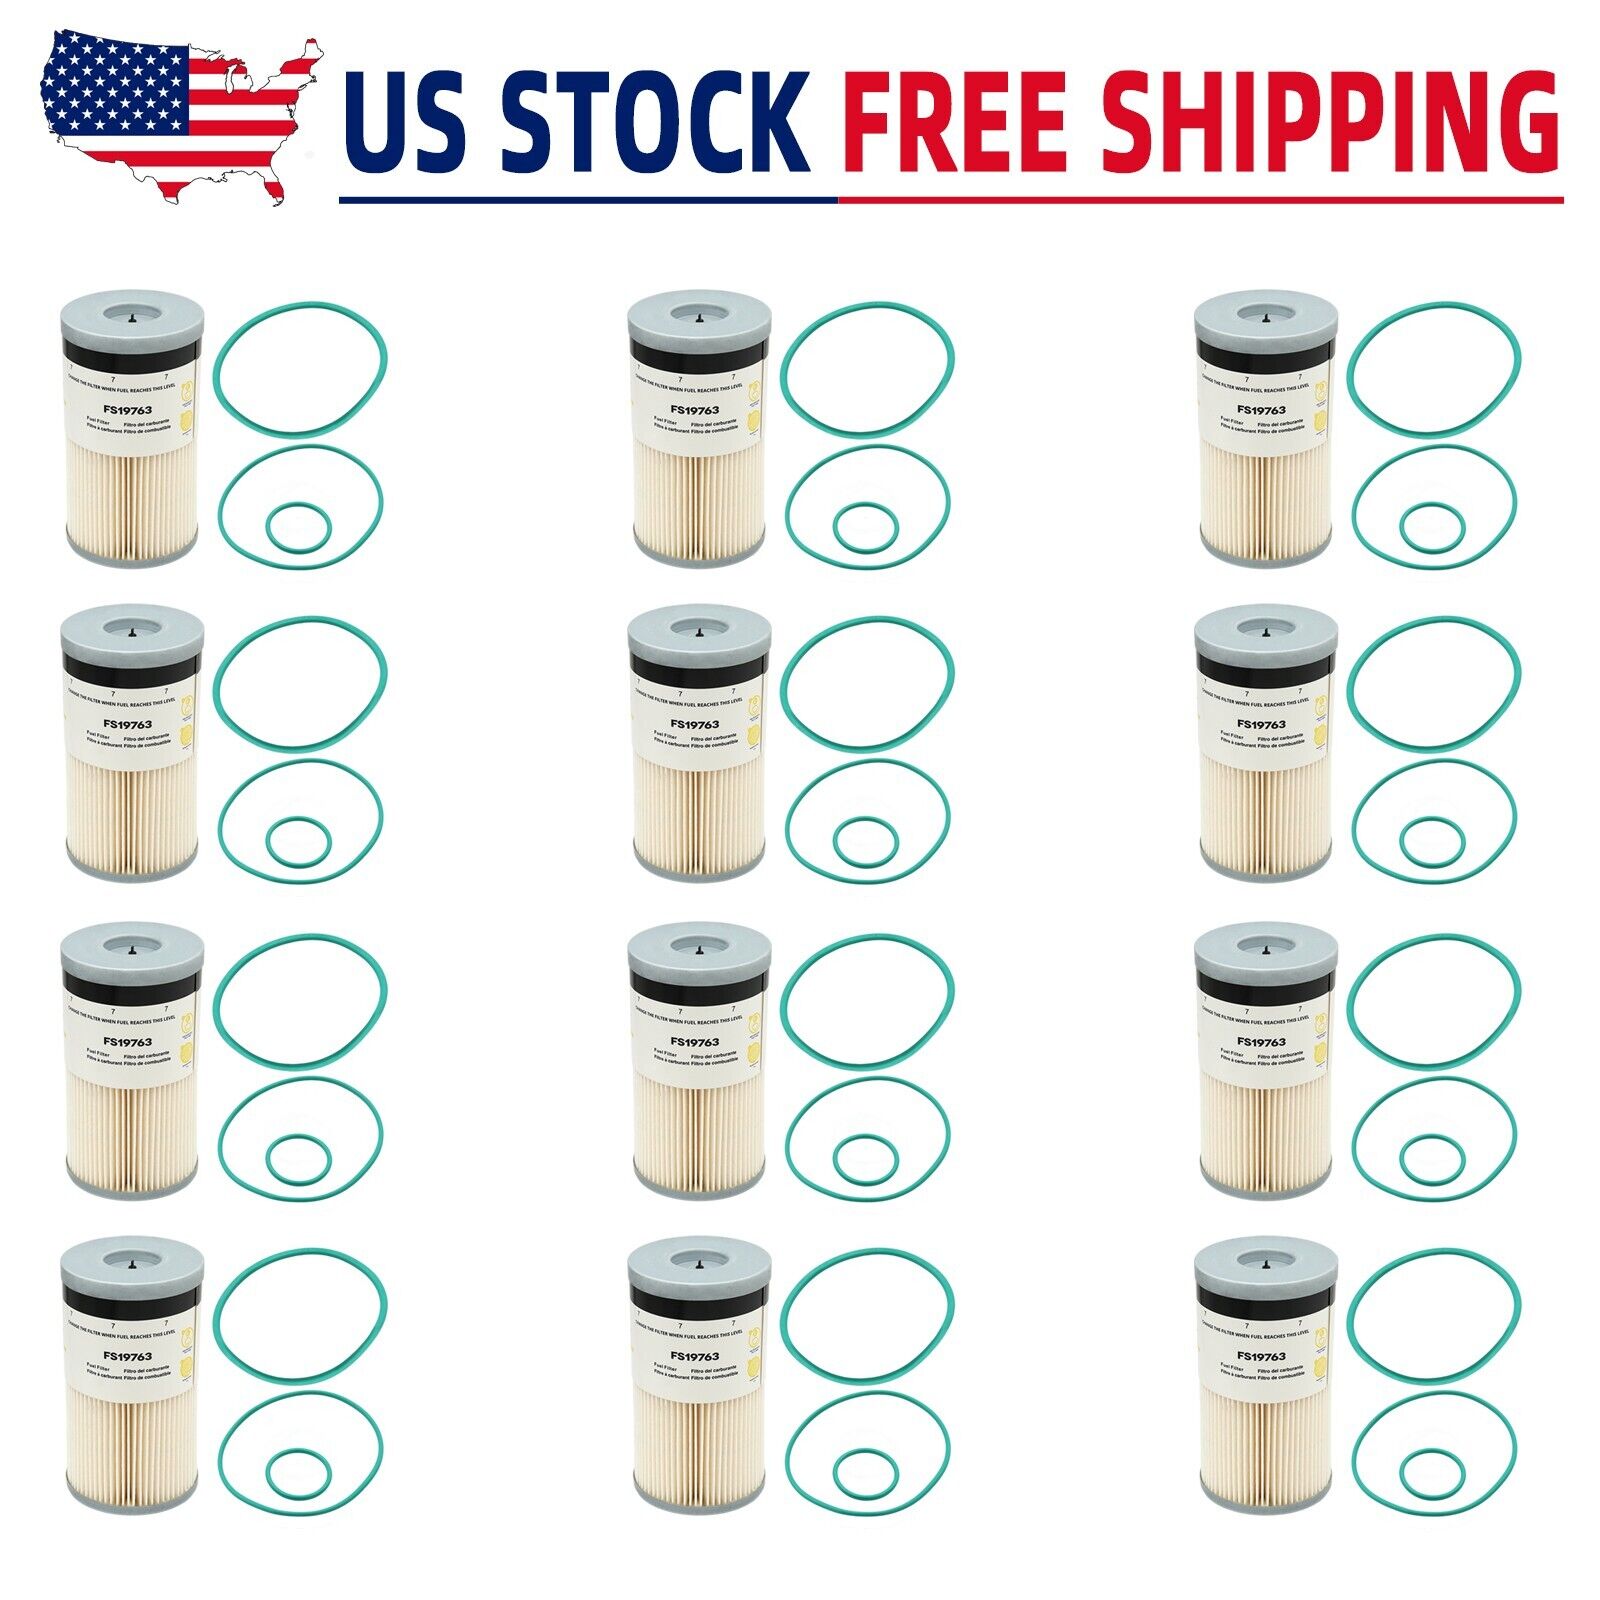 12Pack-For FleetGuard Fuel Filter with Water Separator FS19763 7micron